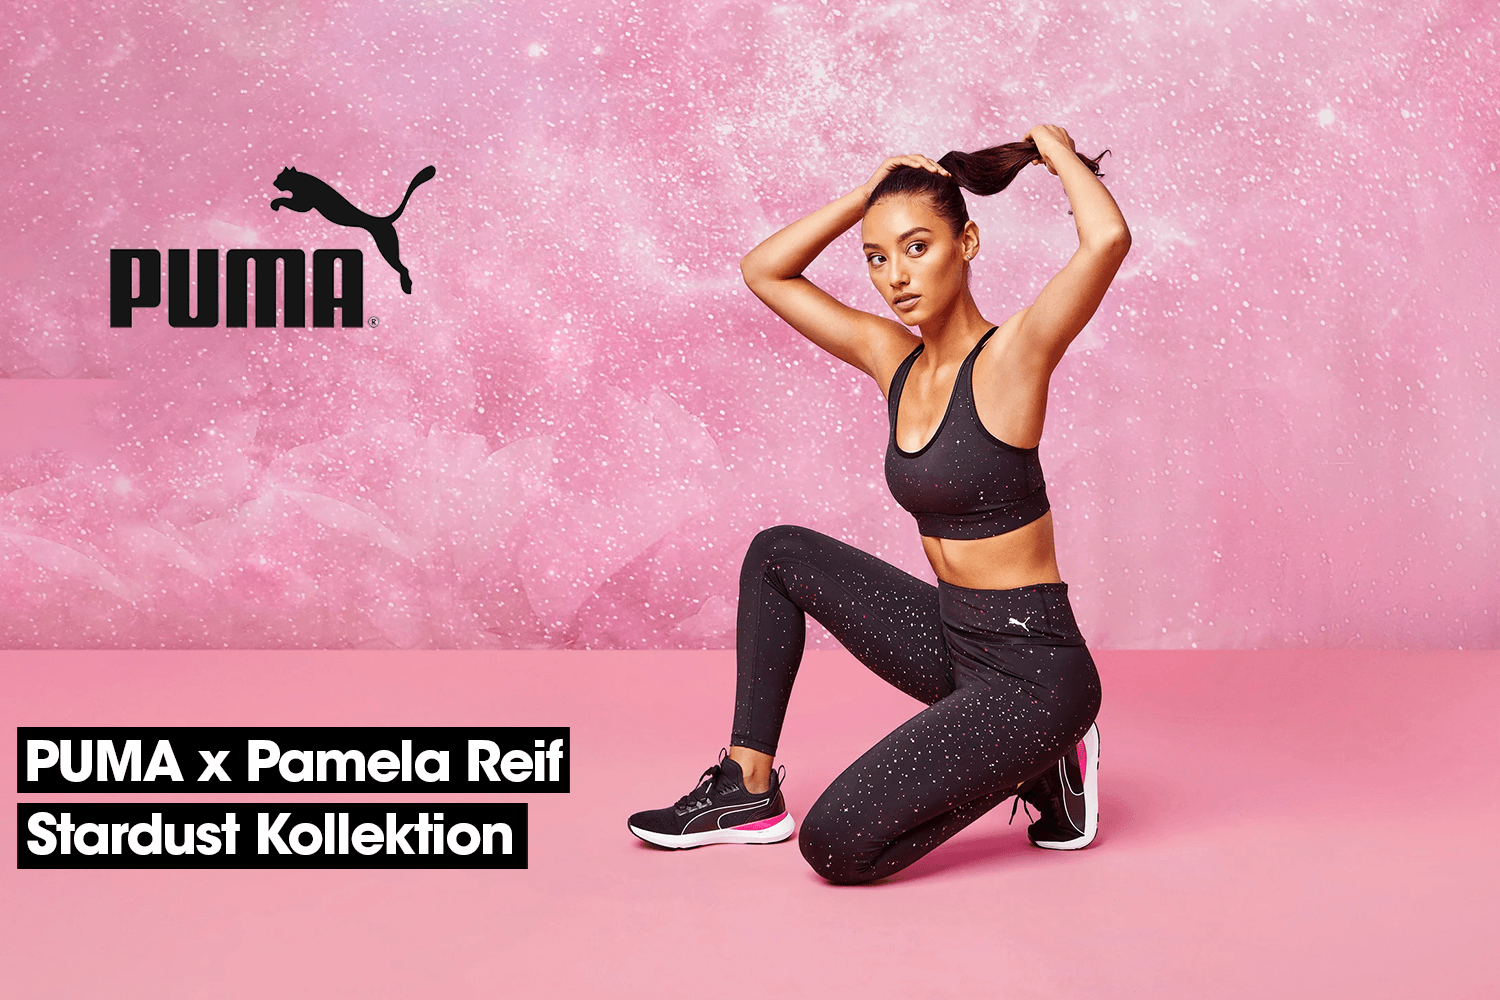 Move with magic with PUMA Stardust collection